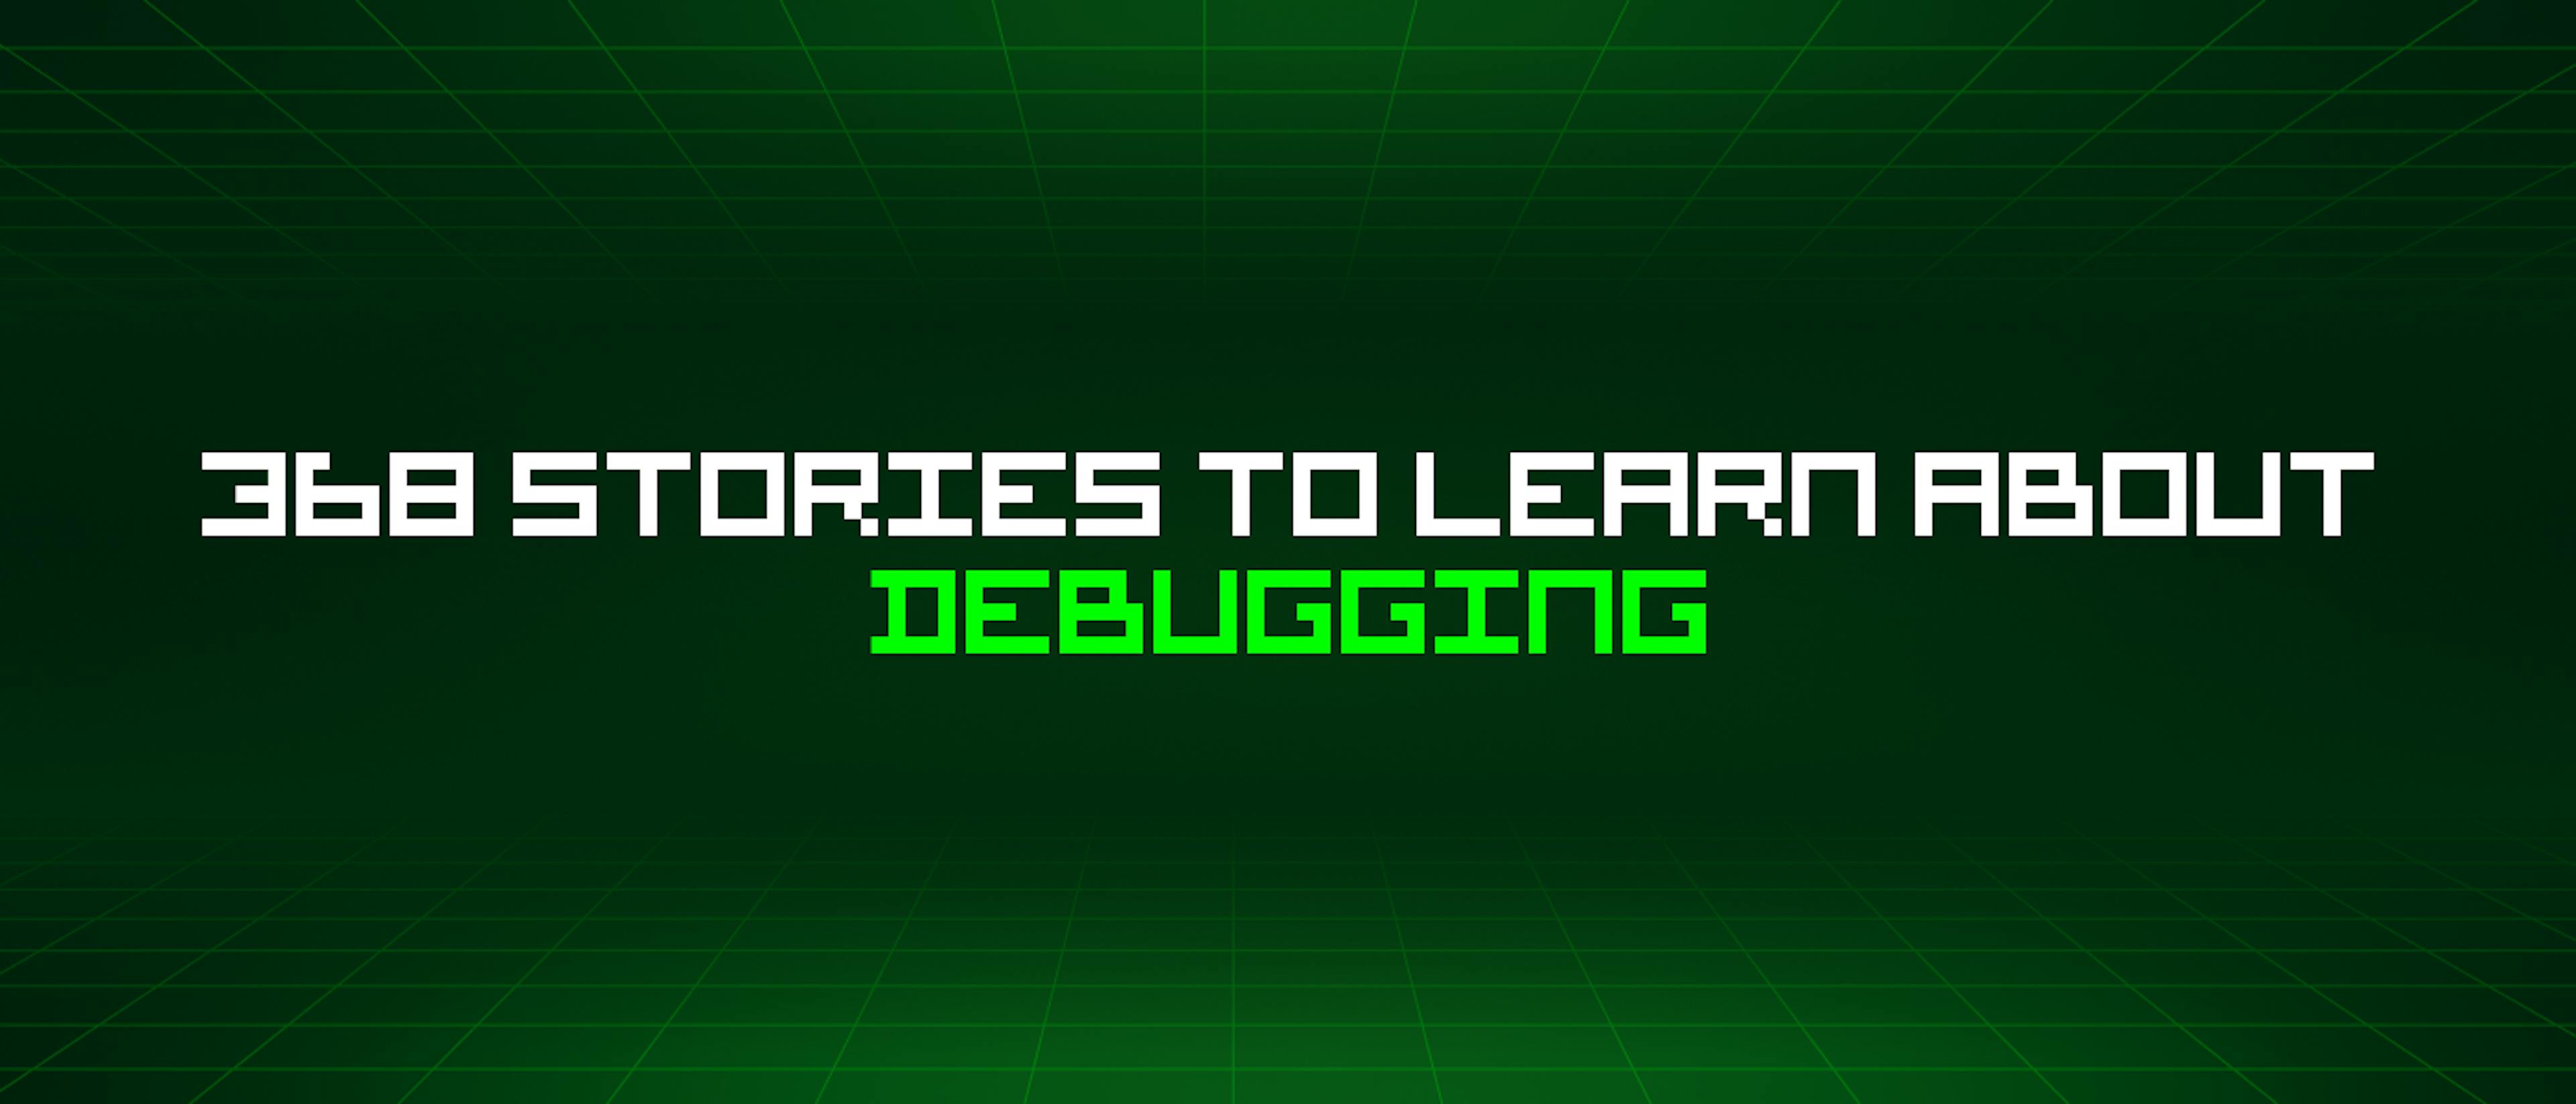 featured image - 368 Stories To Learn About Debugging